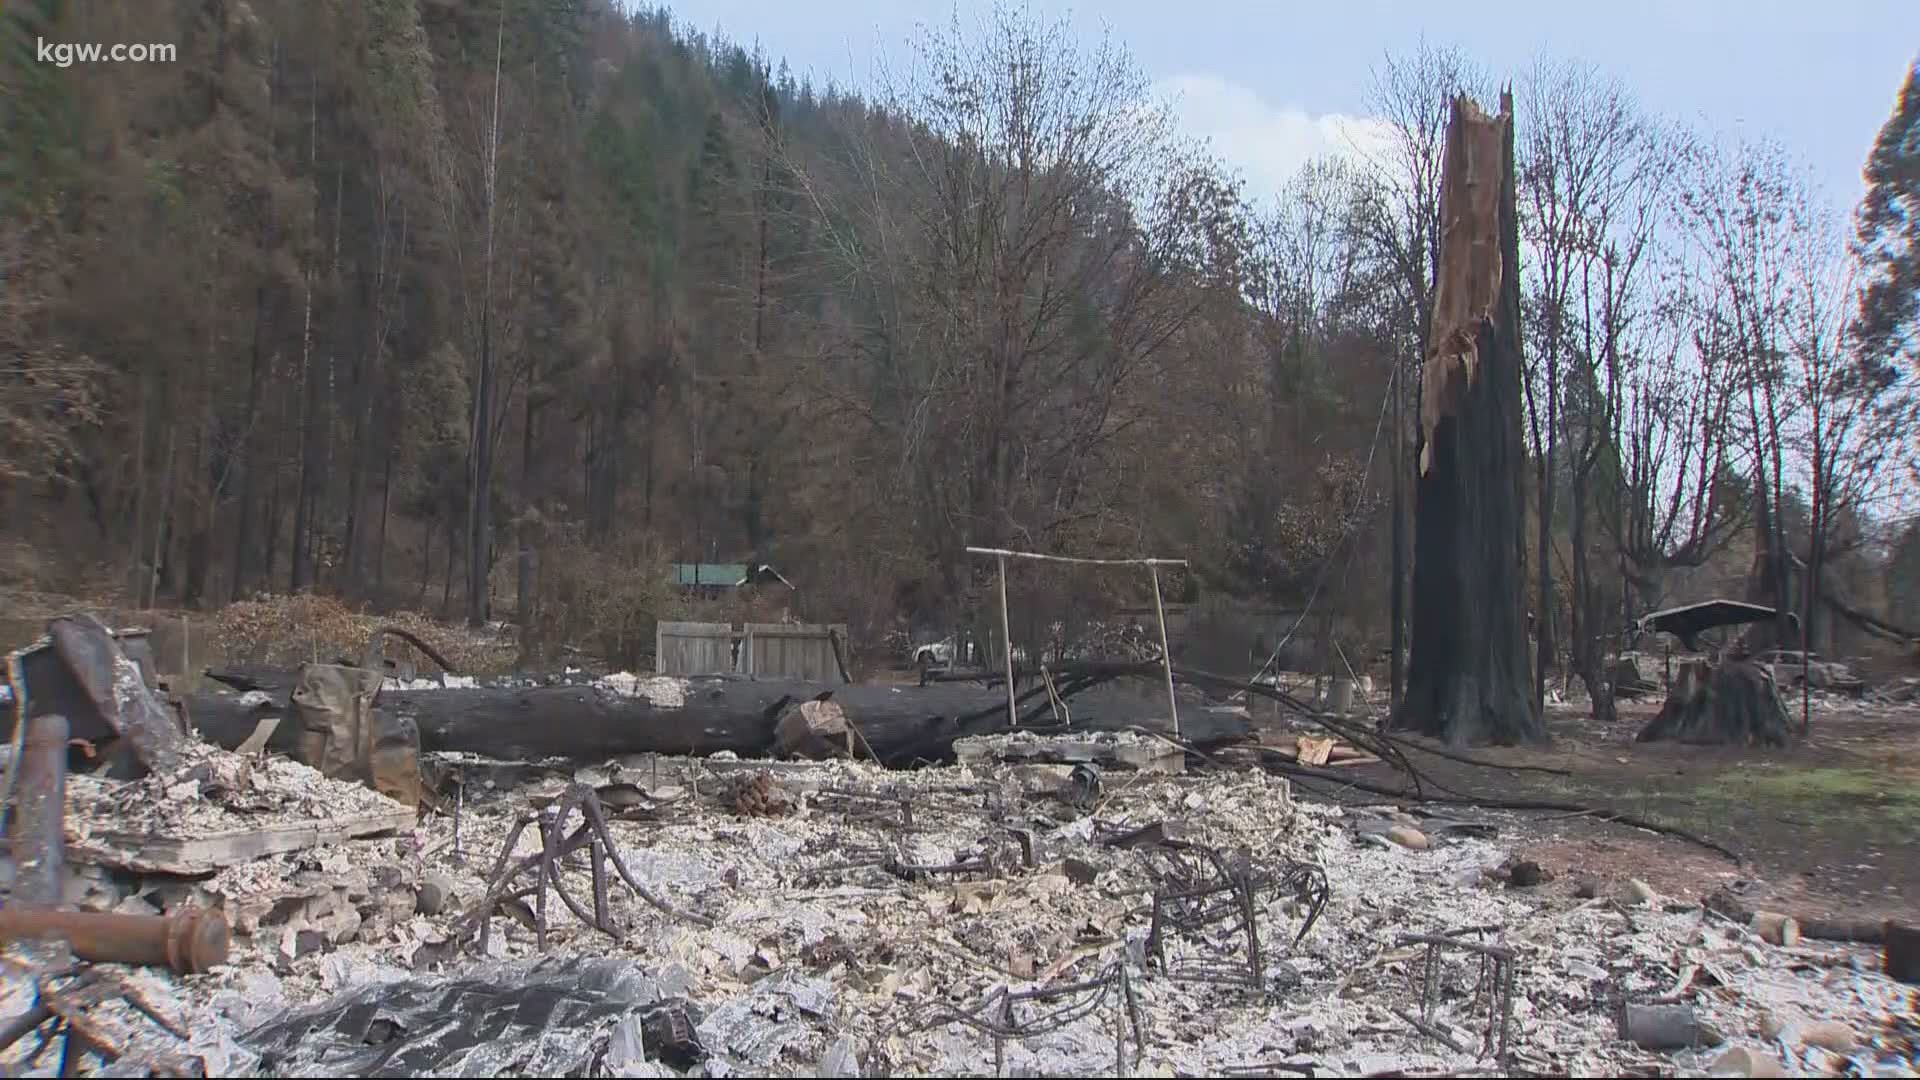 The Holiday Farm Fire has destroyed homes and businesses in Lane County, east of Eugene. We take a look at the damage.